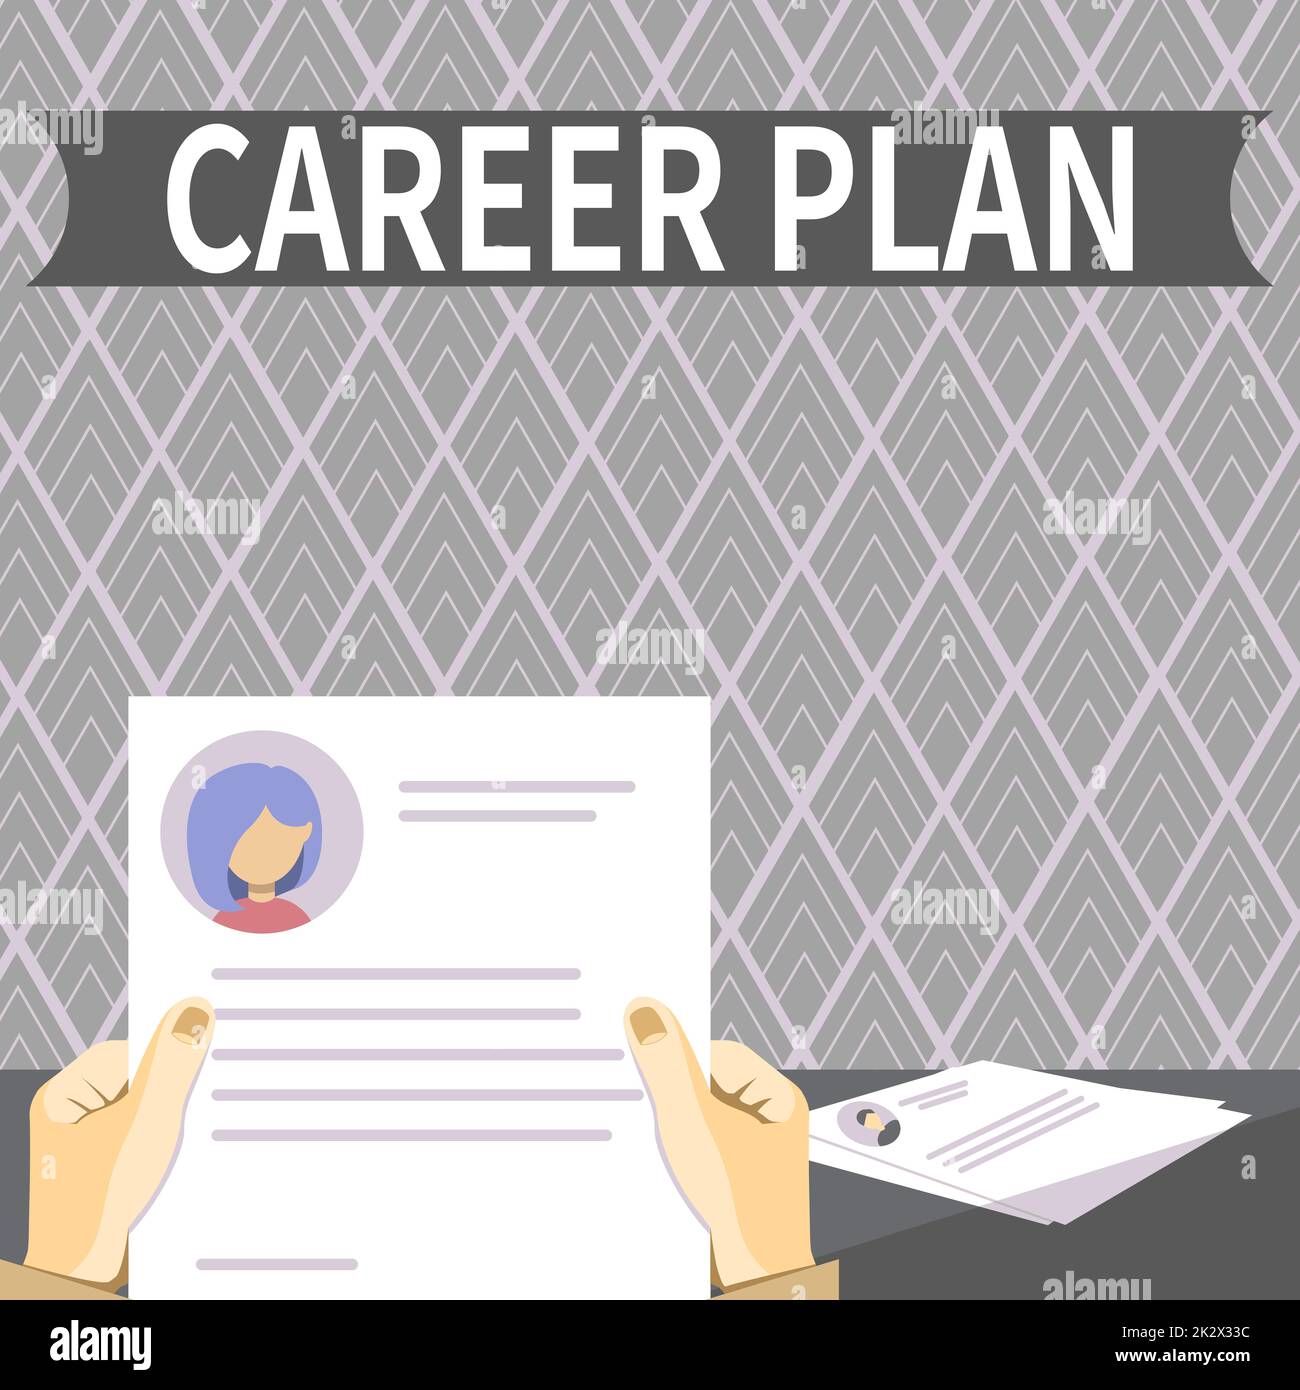 Text sign showing Career Plan, Concept meaning ongoing process where you Explore your interests and abilities Hands Holding Resume Showing New Career Stock Photo